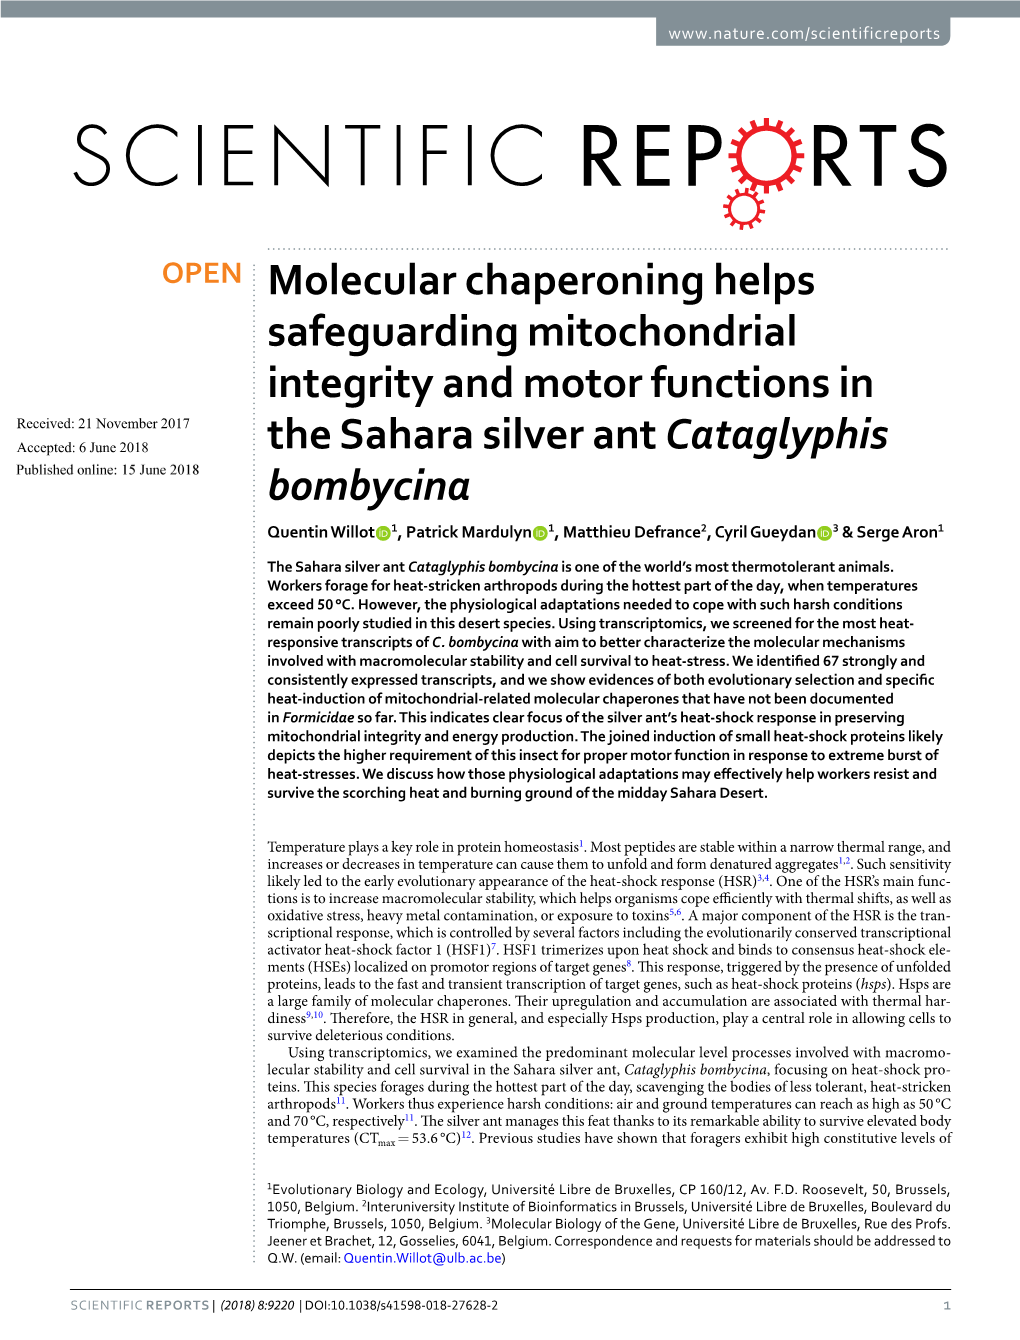 Molecular Chaperoning Helps Safeguarding Mitochondrial Integrity